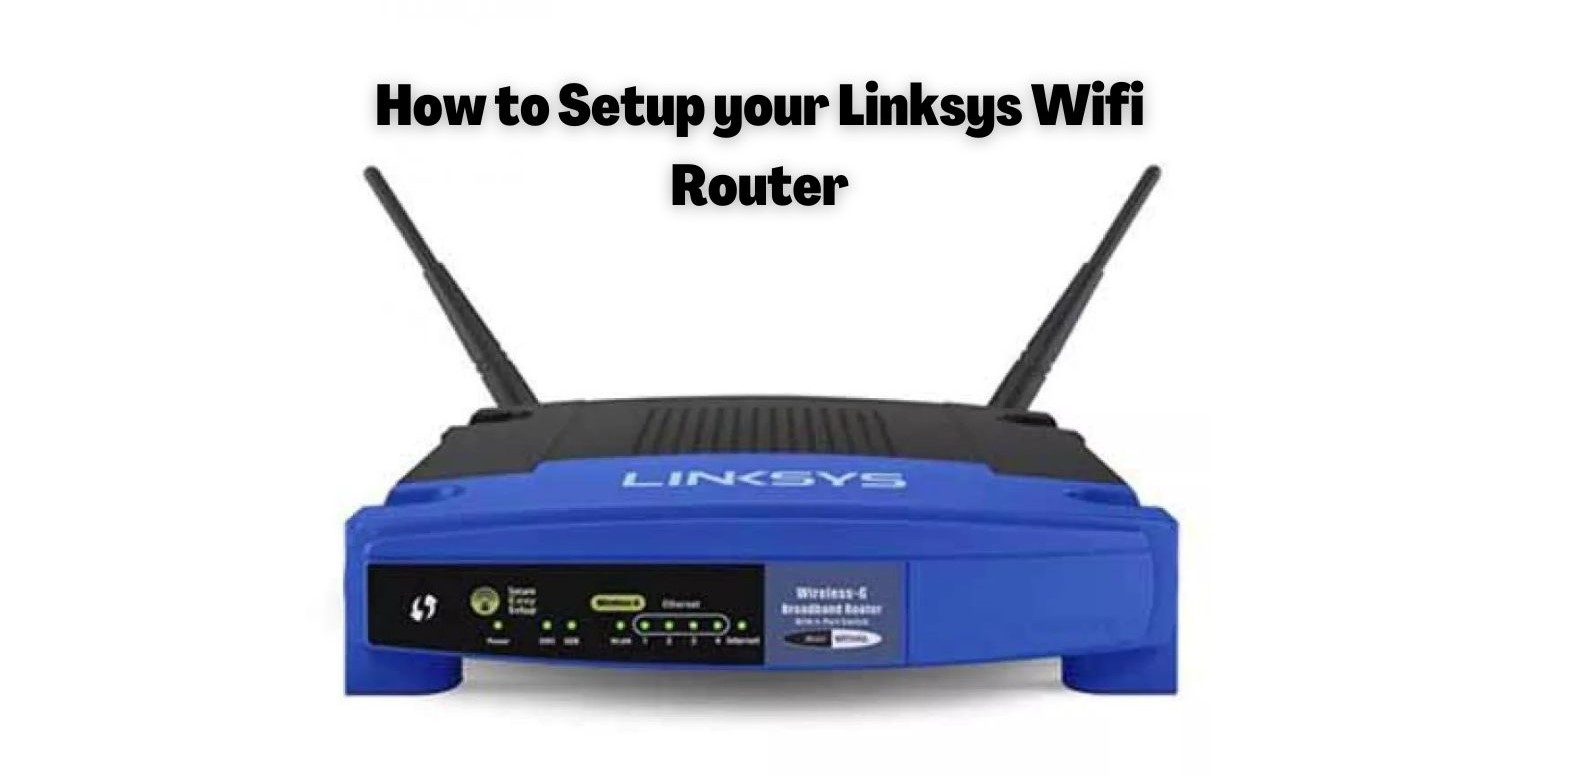 How To Repair Linksys Router